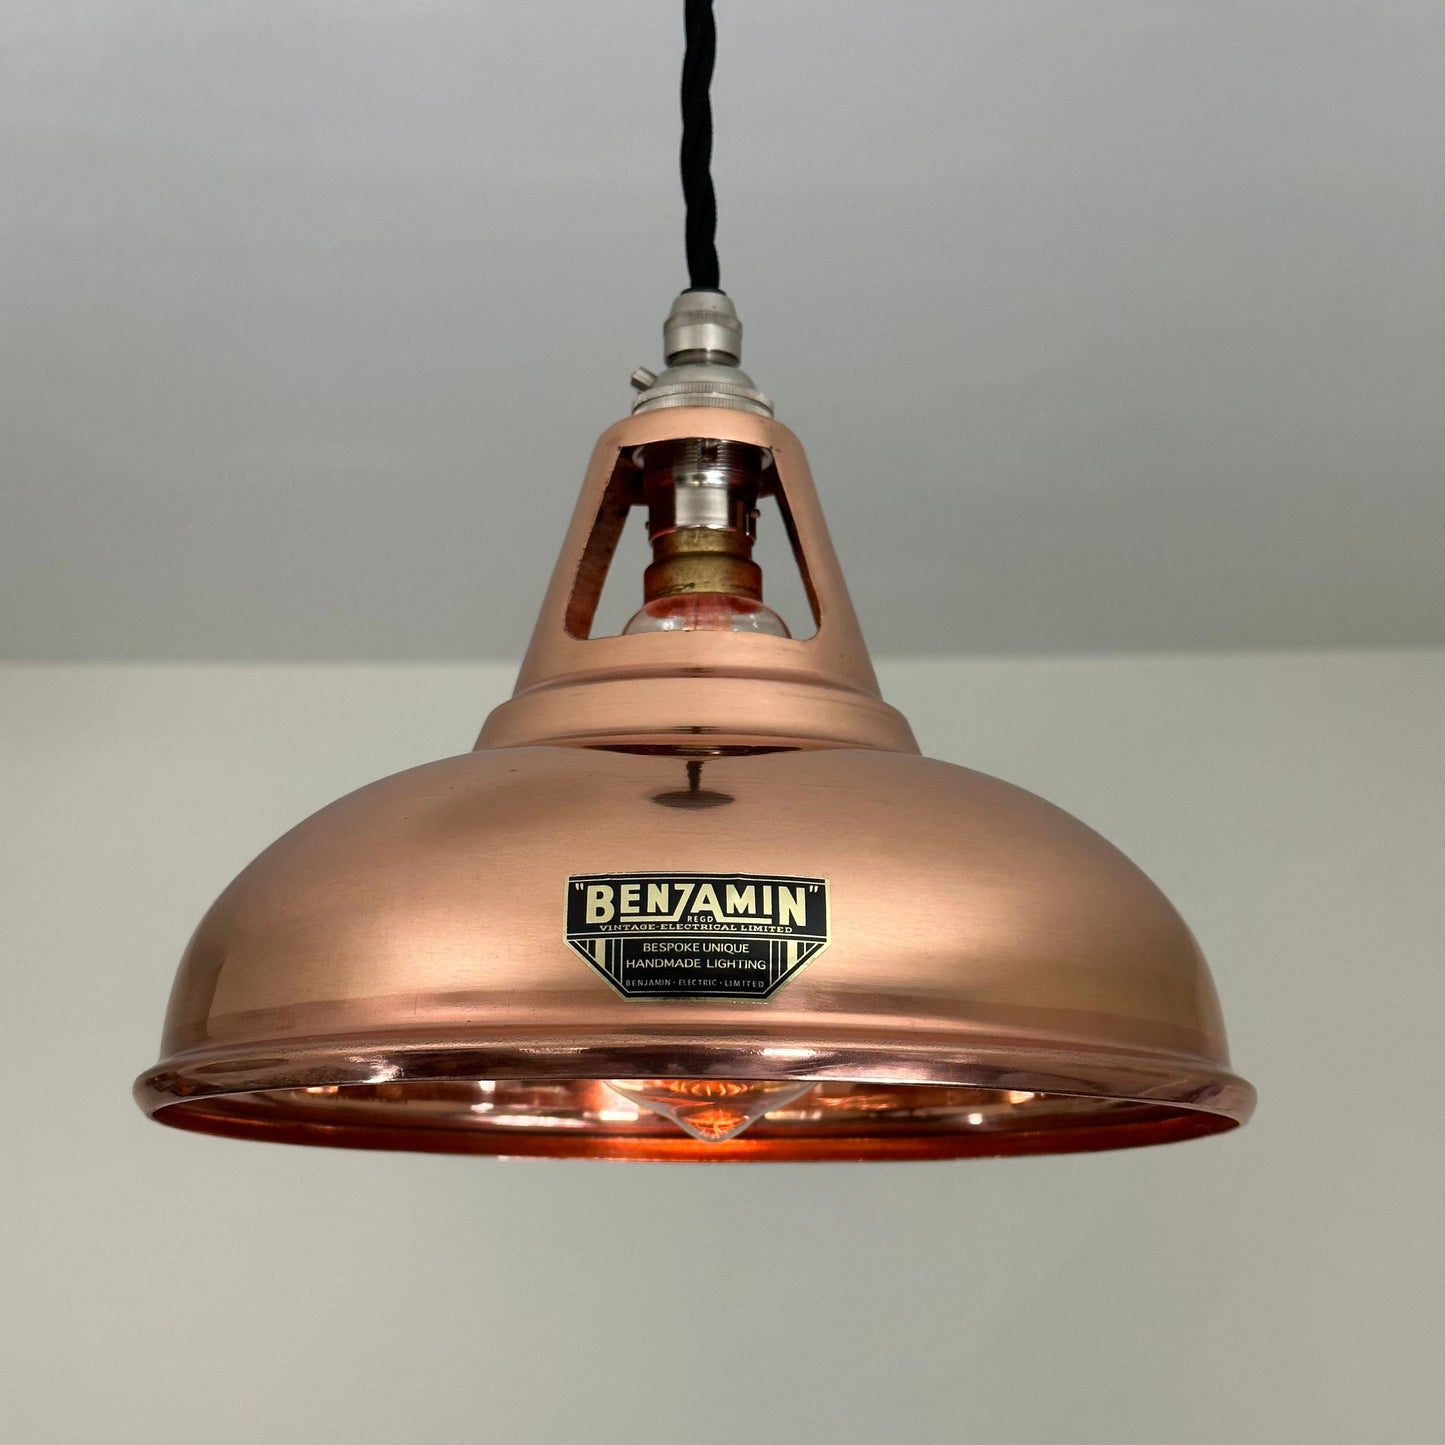 Cawston Small ~ Solid Copper Lamp Shade 1932 Design Pendant Set Light | Dining Room Ceiling | Kitchen Table | Vintage Industrial | 9 Inch